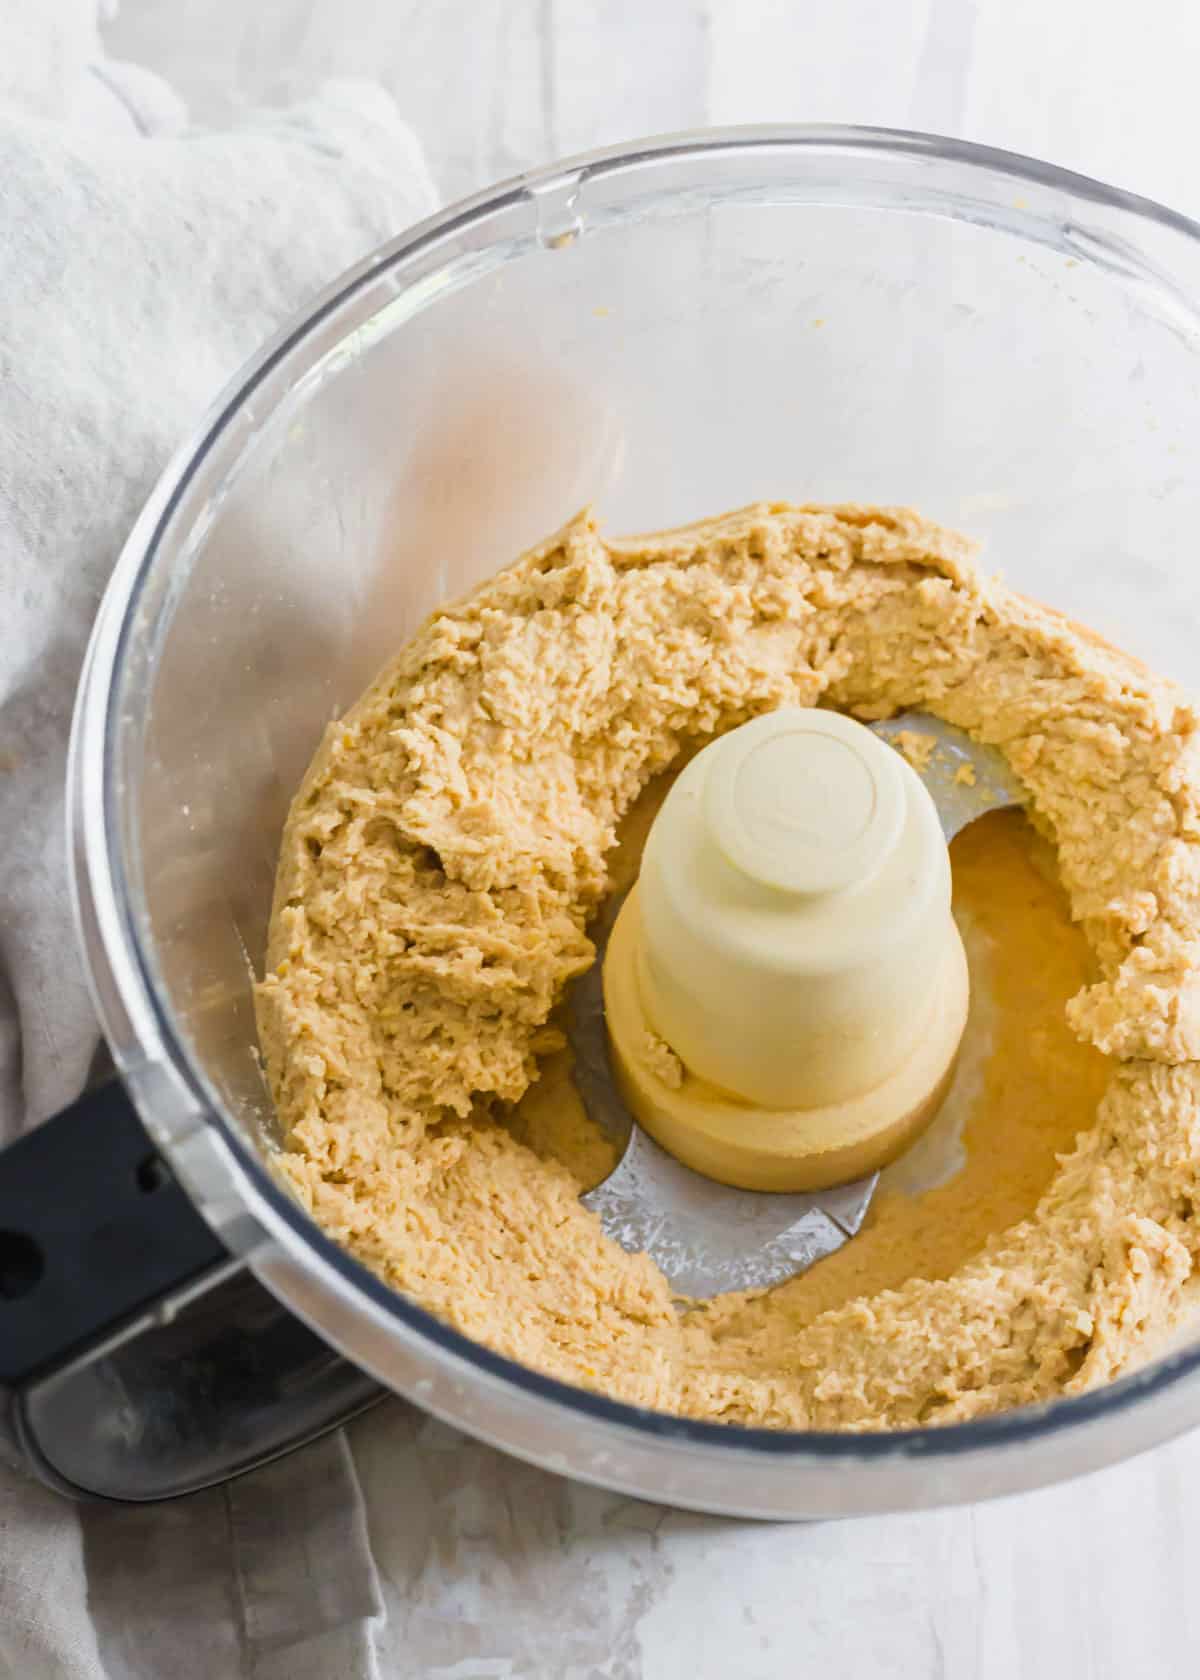 Chickpea blondie batter in a food processor before adding chocolate chips.